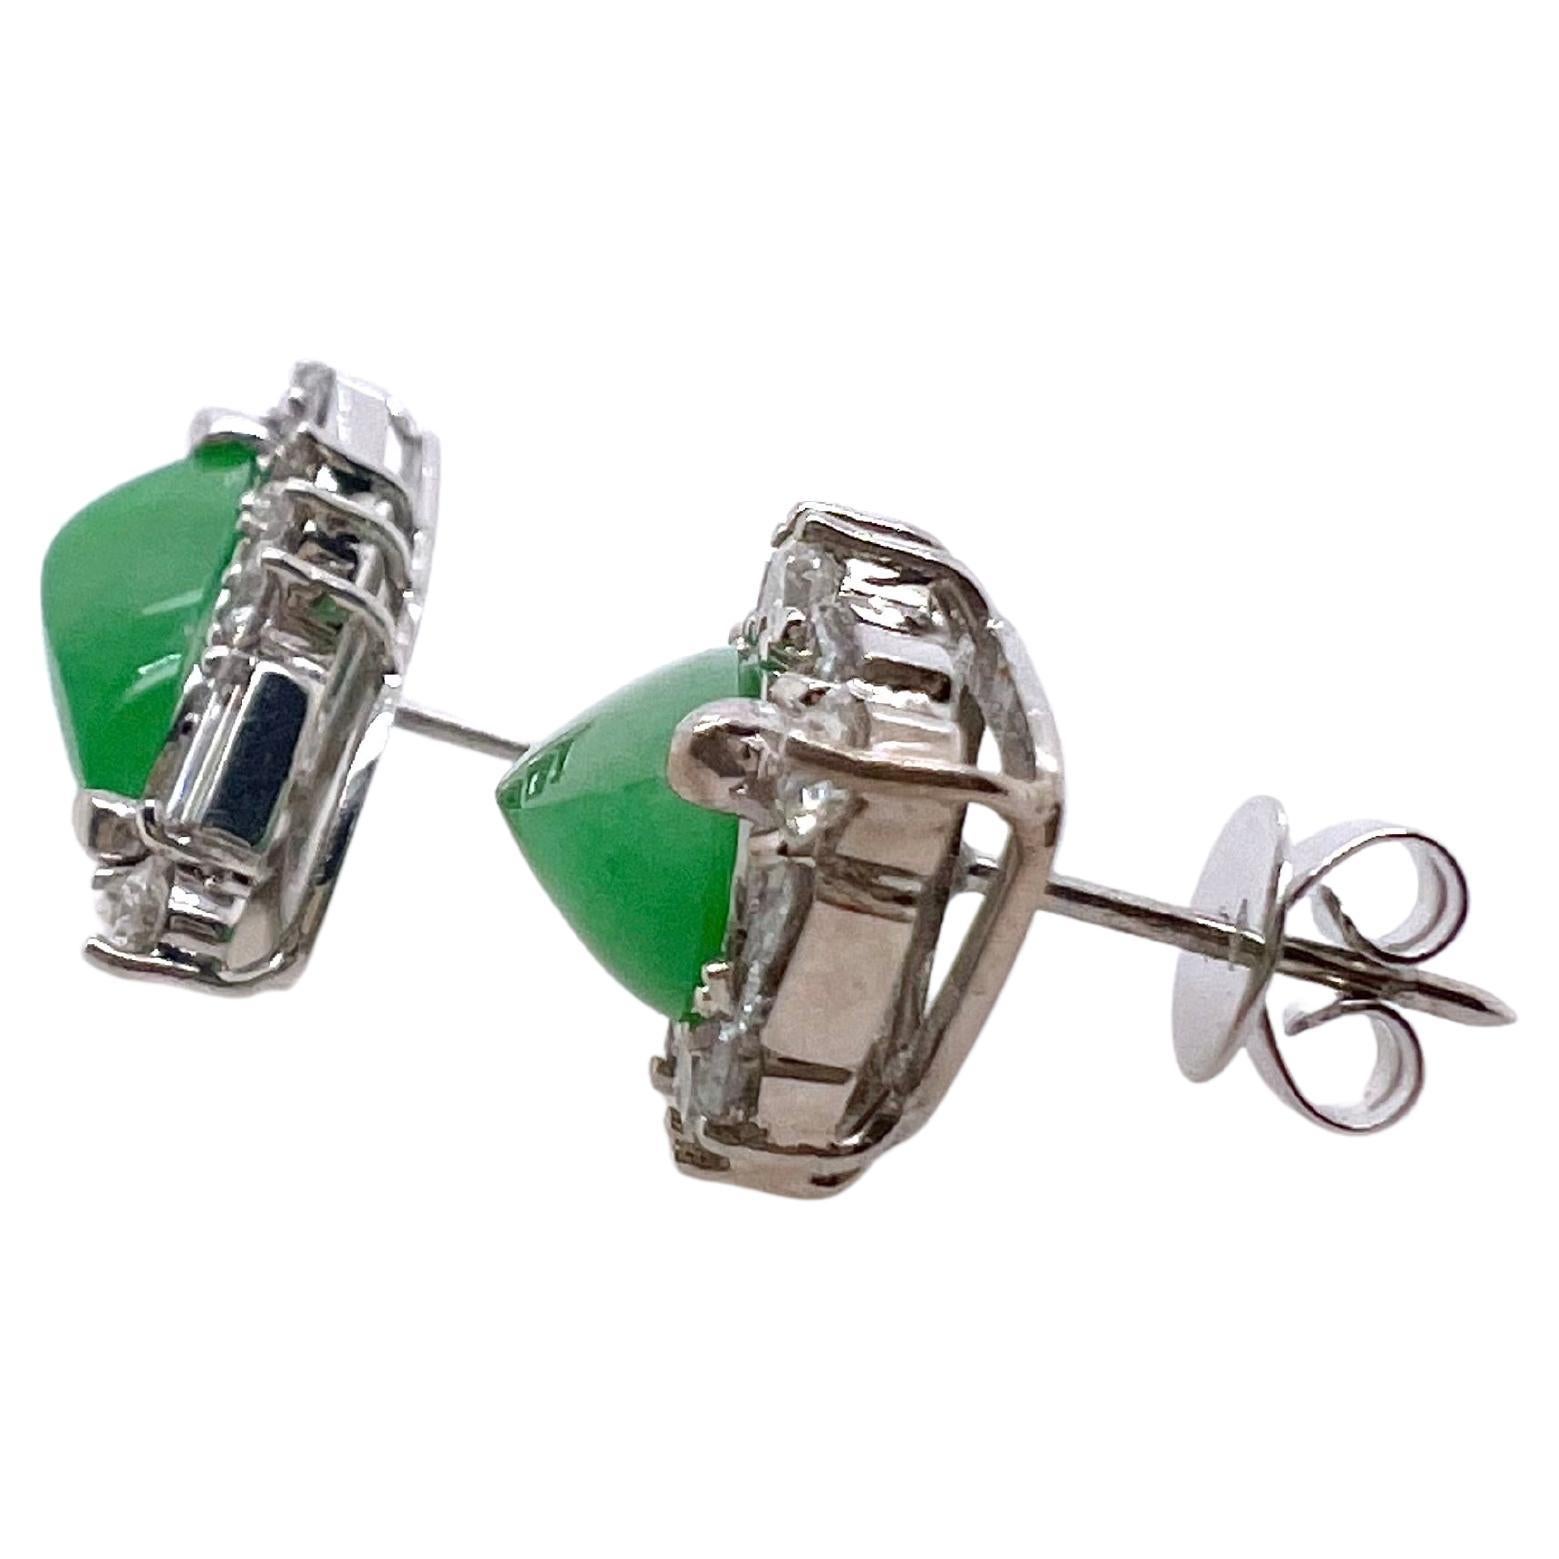 This gorgeous pair of free form GIA Certified natural Jadeite earrings are handmade with baguettes and rounds.  The shape of the earring is made to keep the same pattern as the free form Jadeite.  The beautiful apple green color matches well and is